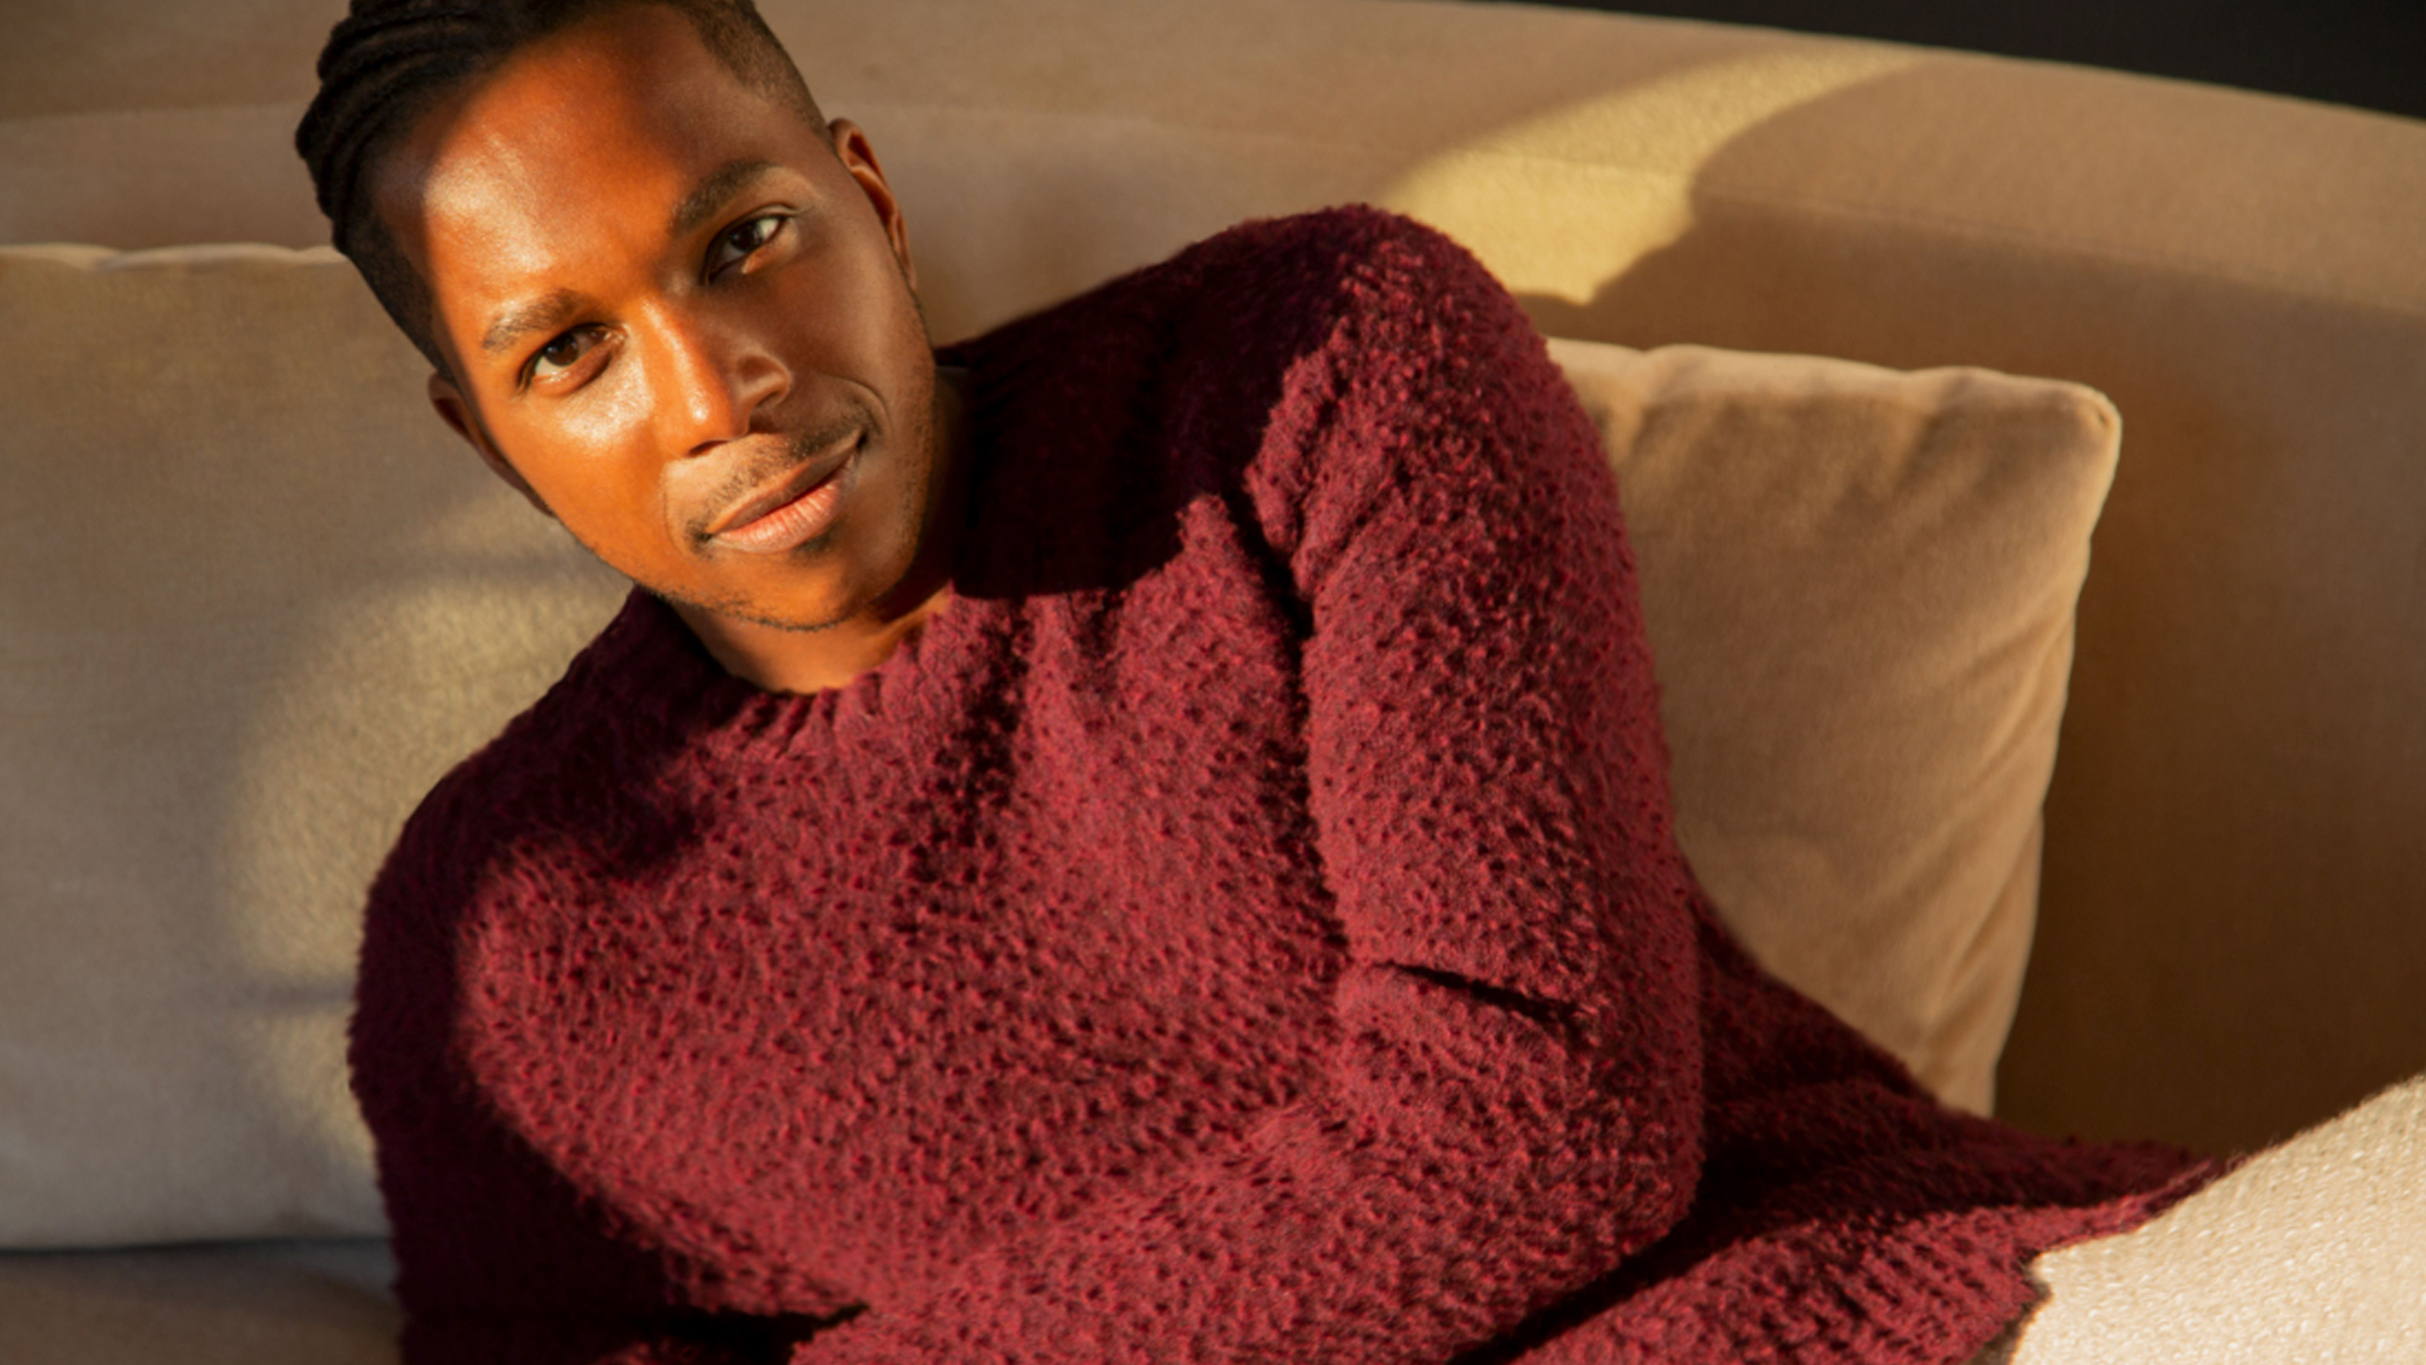 An Evening With Leslie Odom Jr.